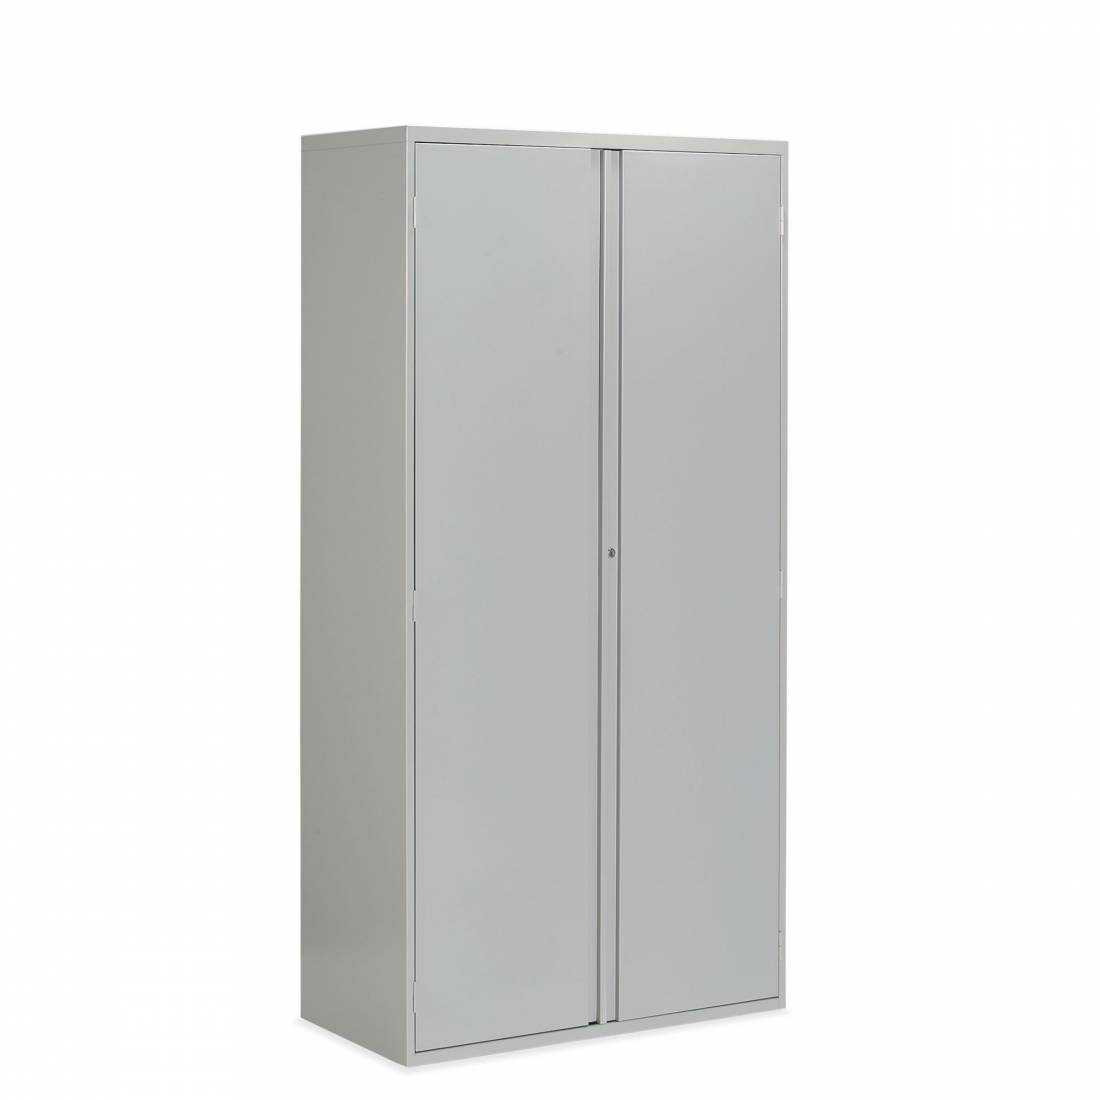 Two Door Storage Cabinet - One Fixed Shelf, Three Adjustable Shelves, Looped Full Pull